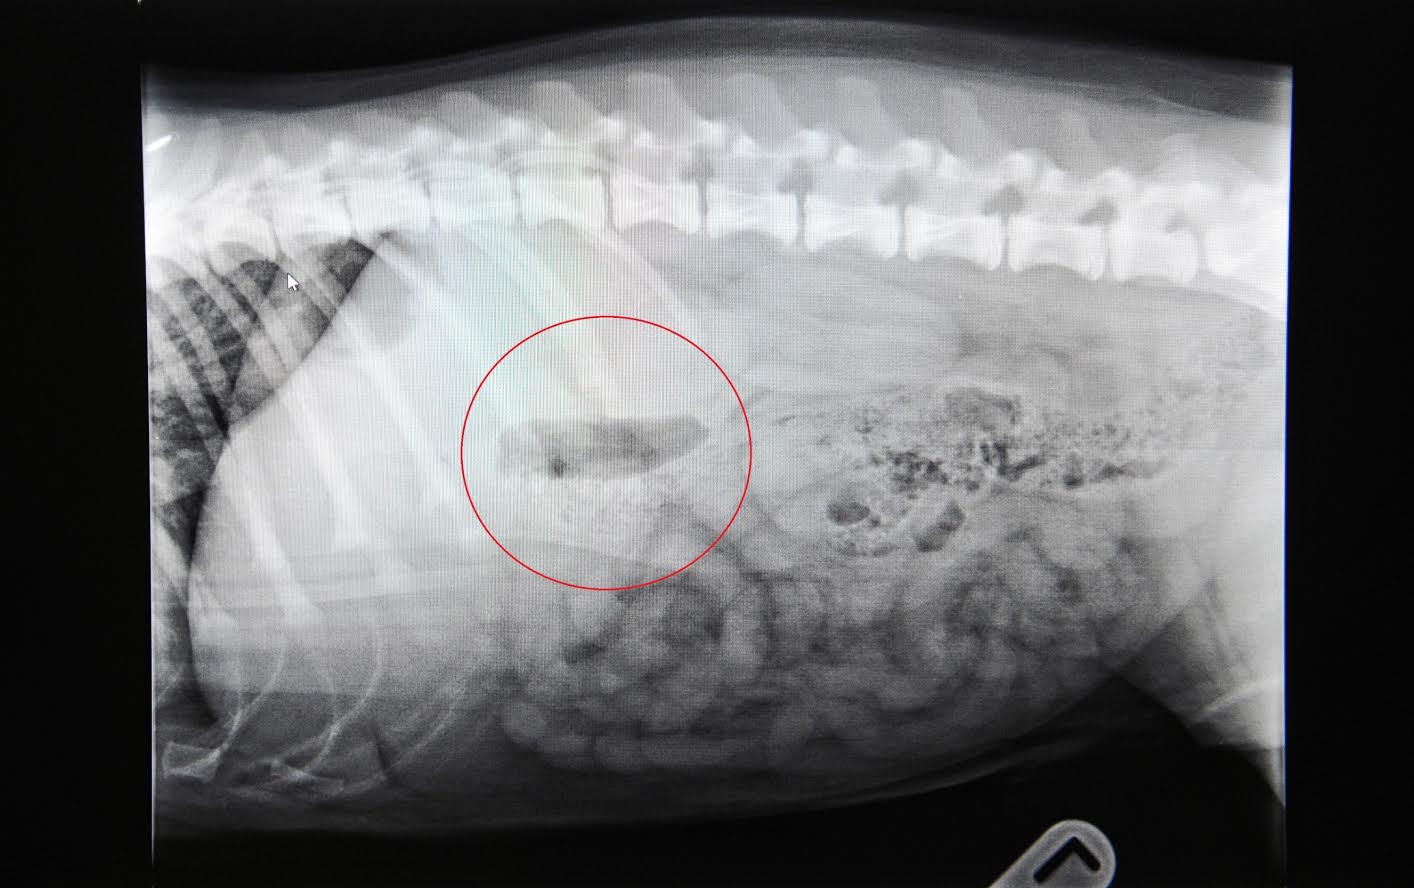 My Dog Swallowed a Squeaker What Should I Do? | Our Fit Pets